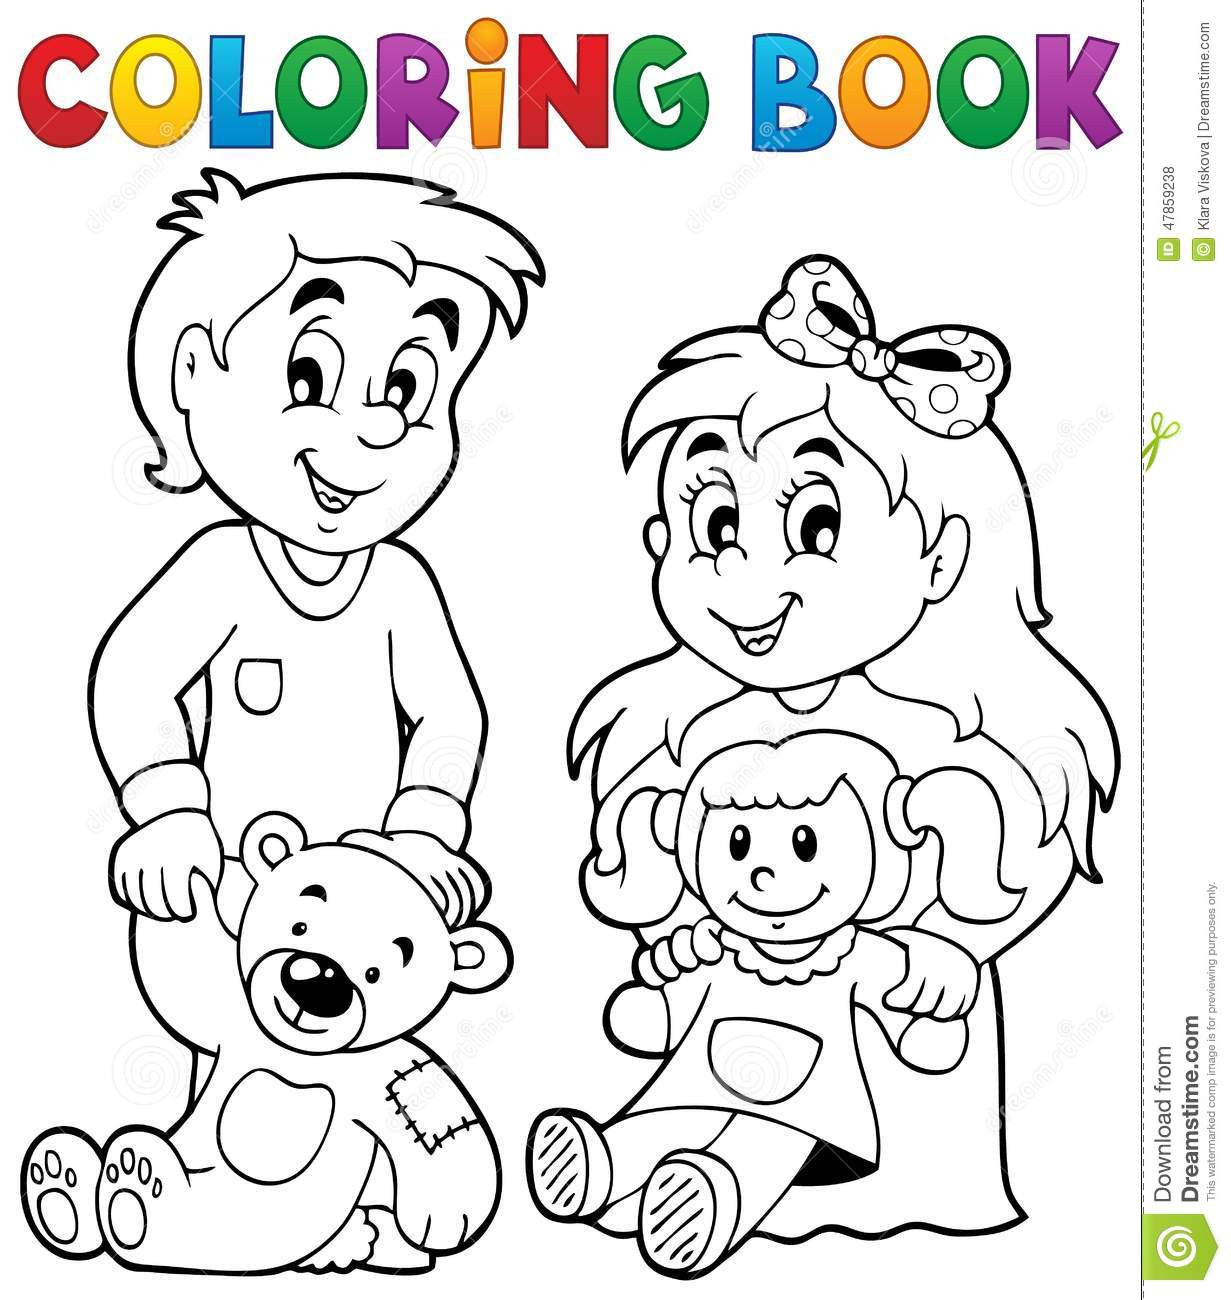 Toddlers Coloring Books
 Coloring Book Children With Toys 1 Stock Vector Image